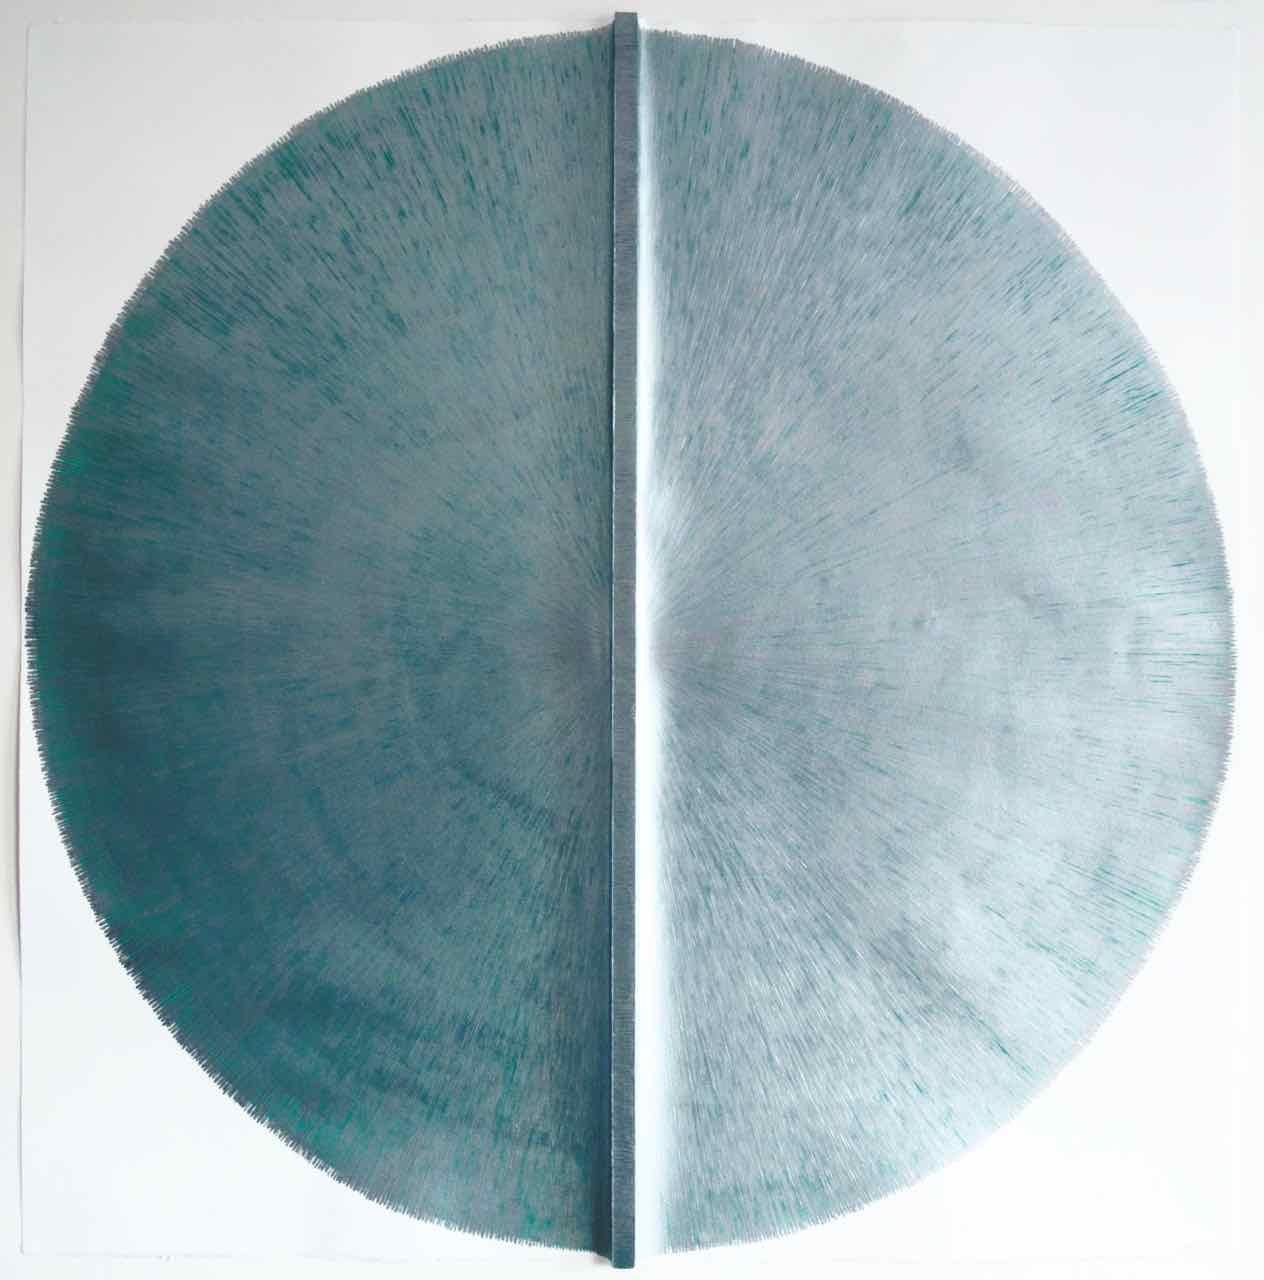 Solid Rod VIII : Large Silver Painting on paper and wood by Silvia Lerin